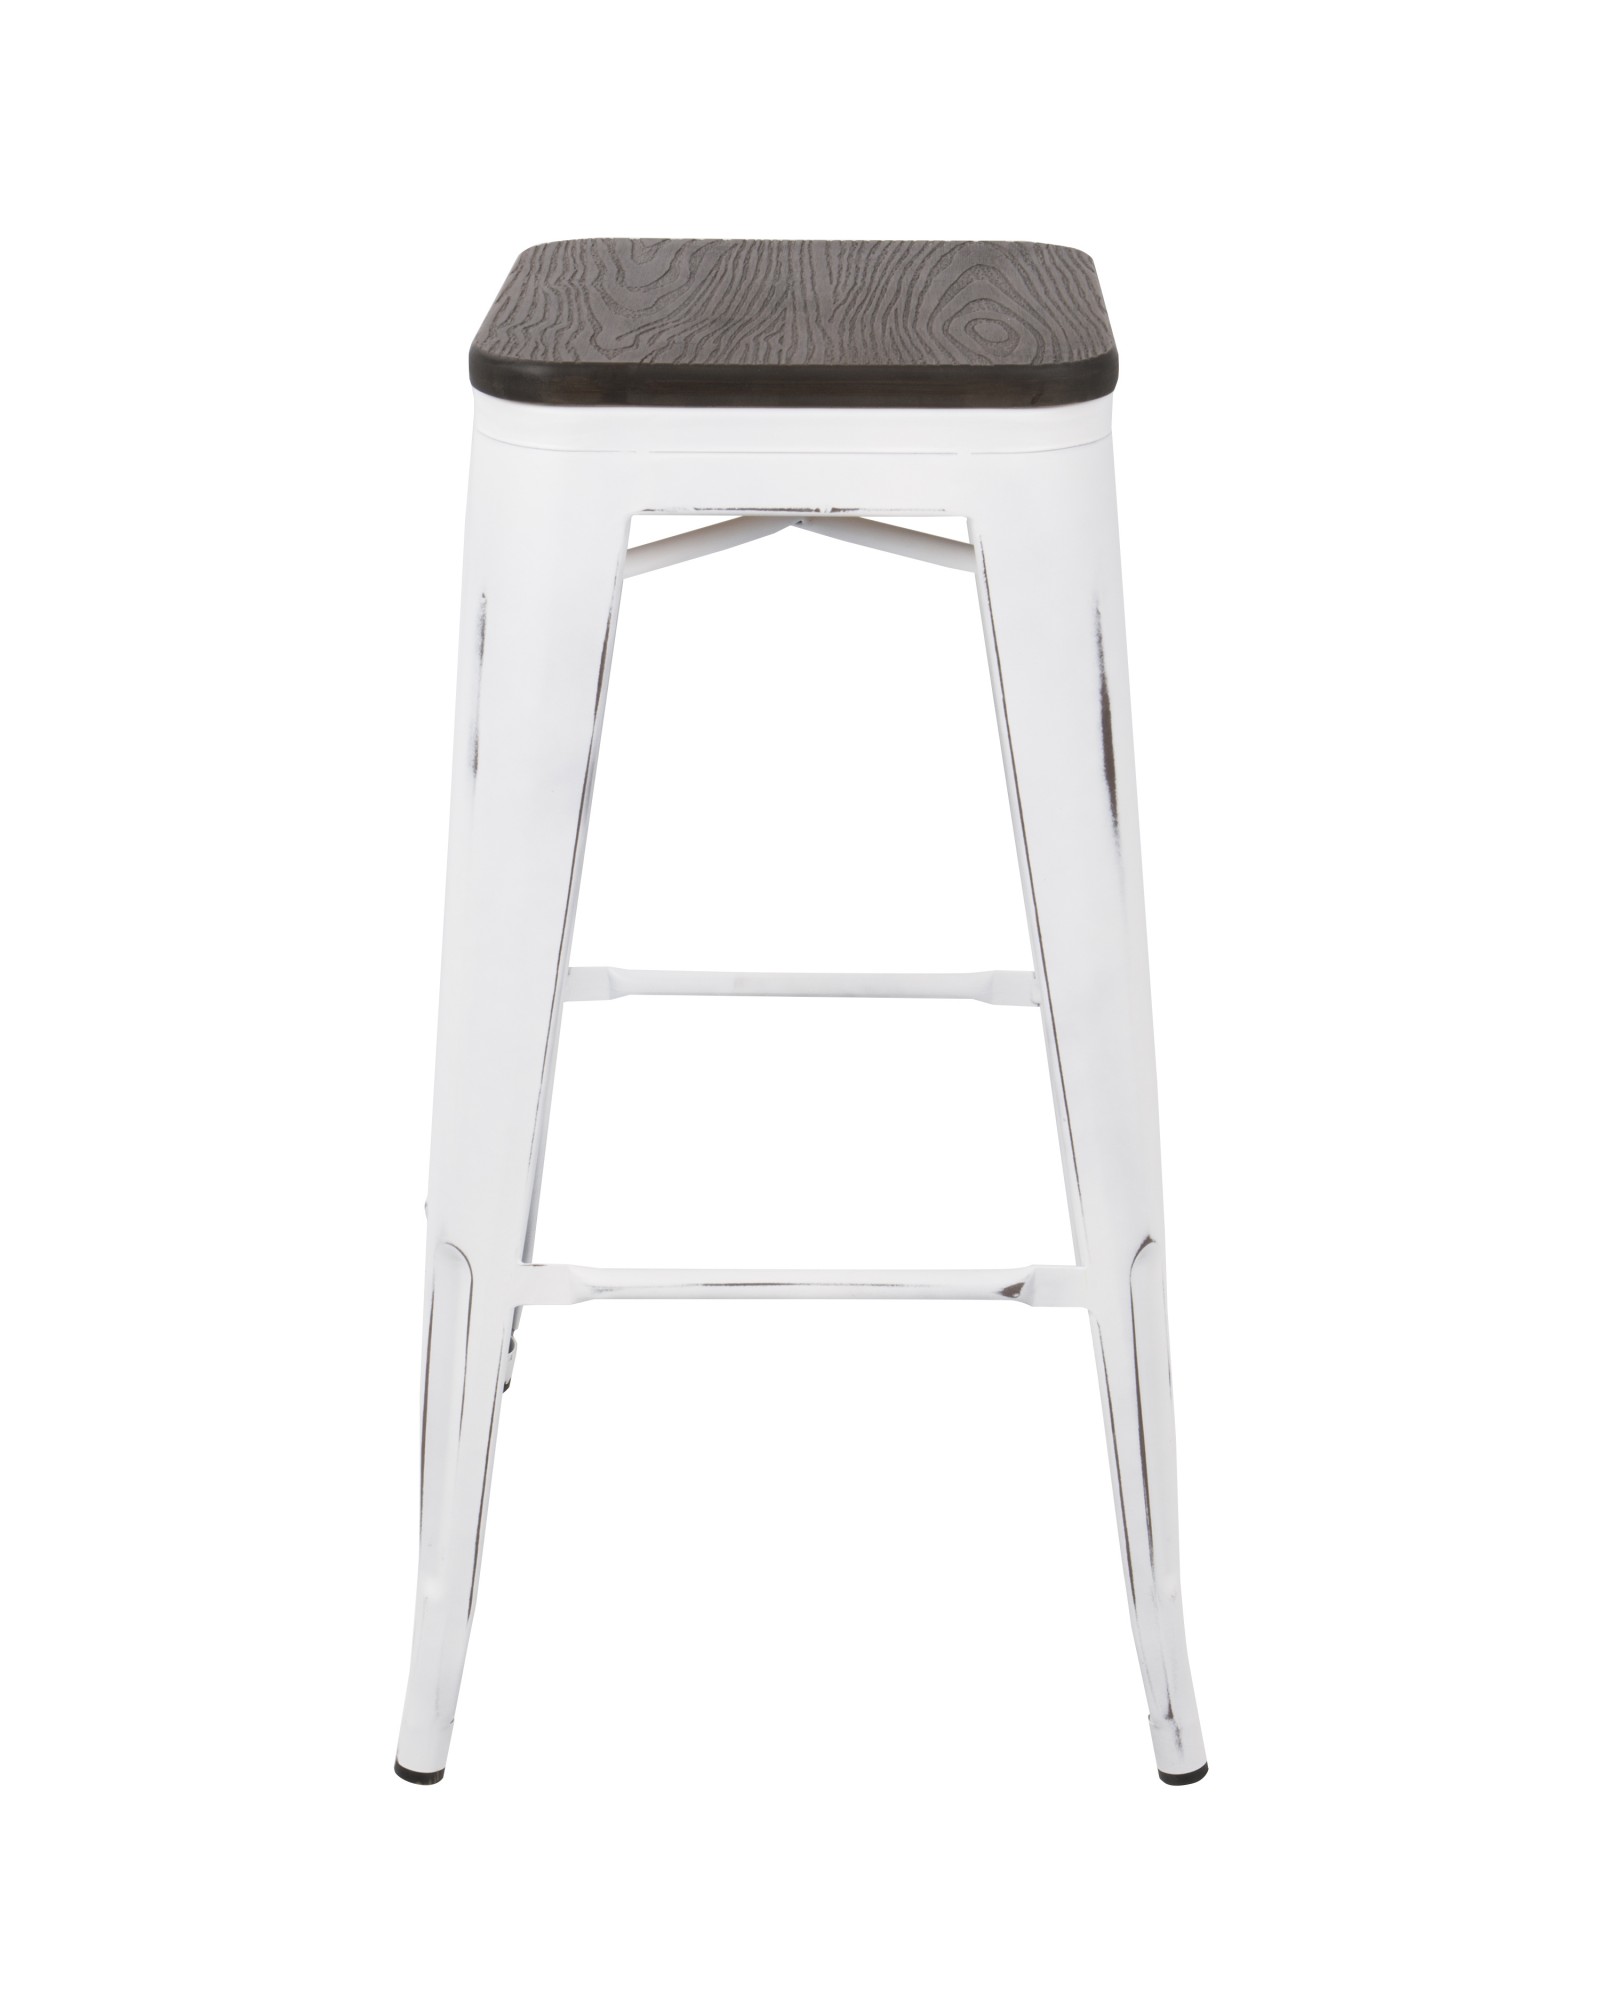 Oregon Industrial Stackable Barstool in Vintage White and Espresso - Set of 2